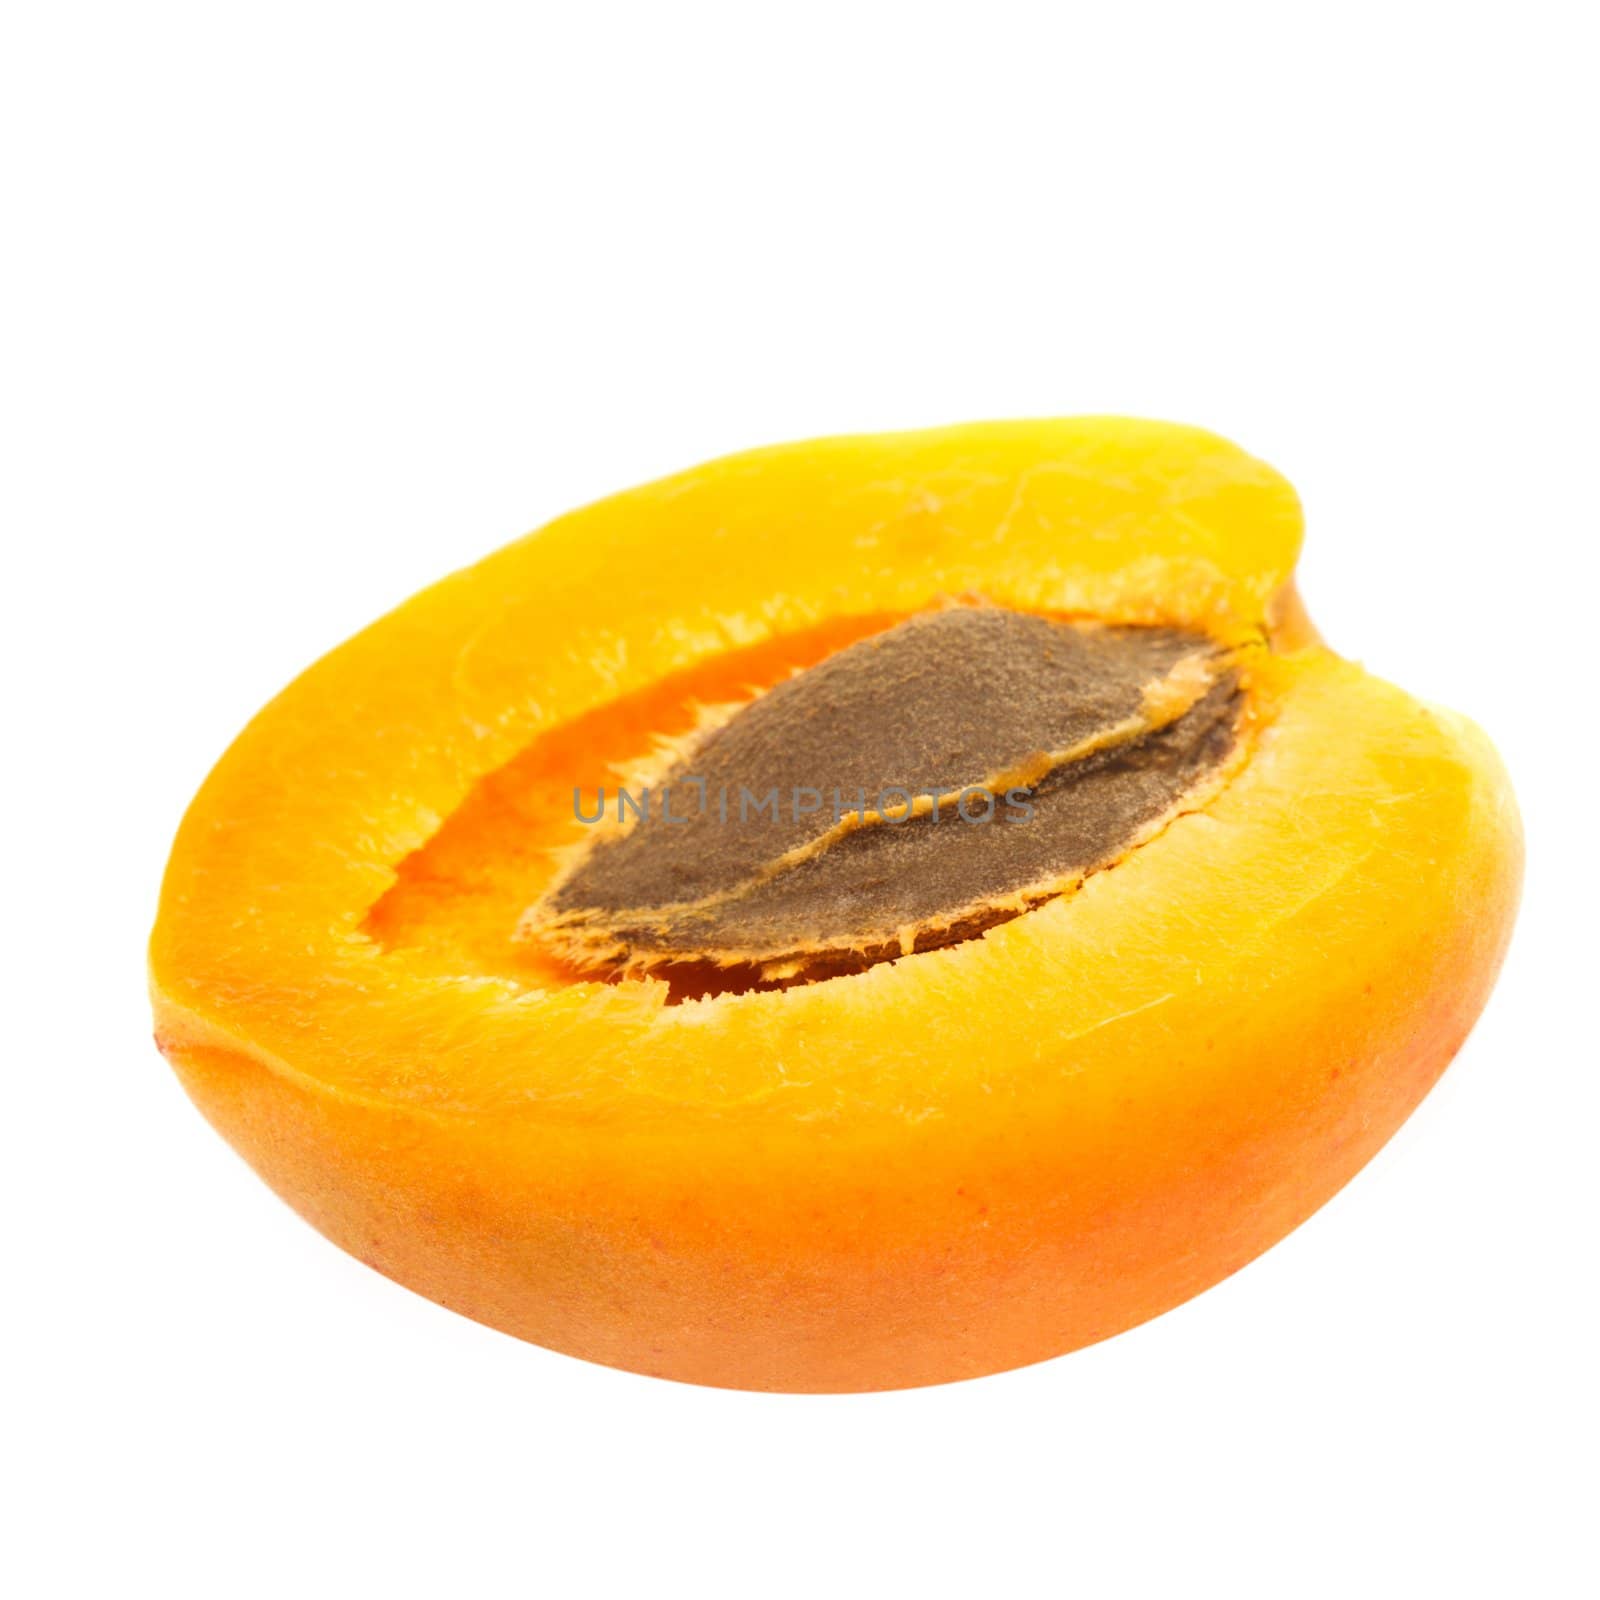 A half of apricot fruit isolated on white